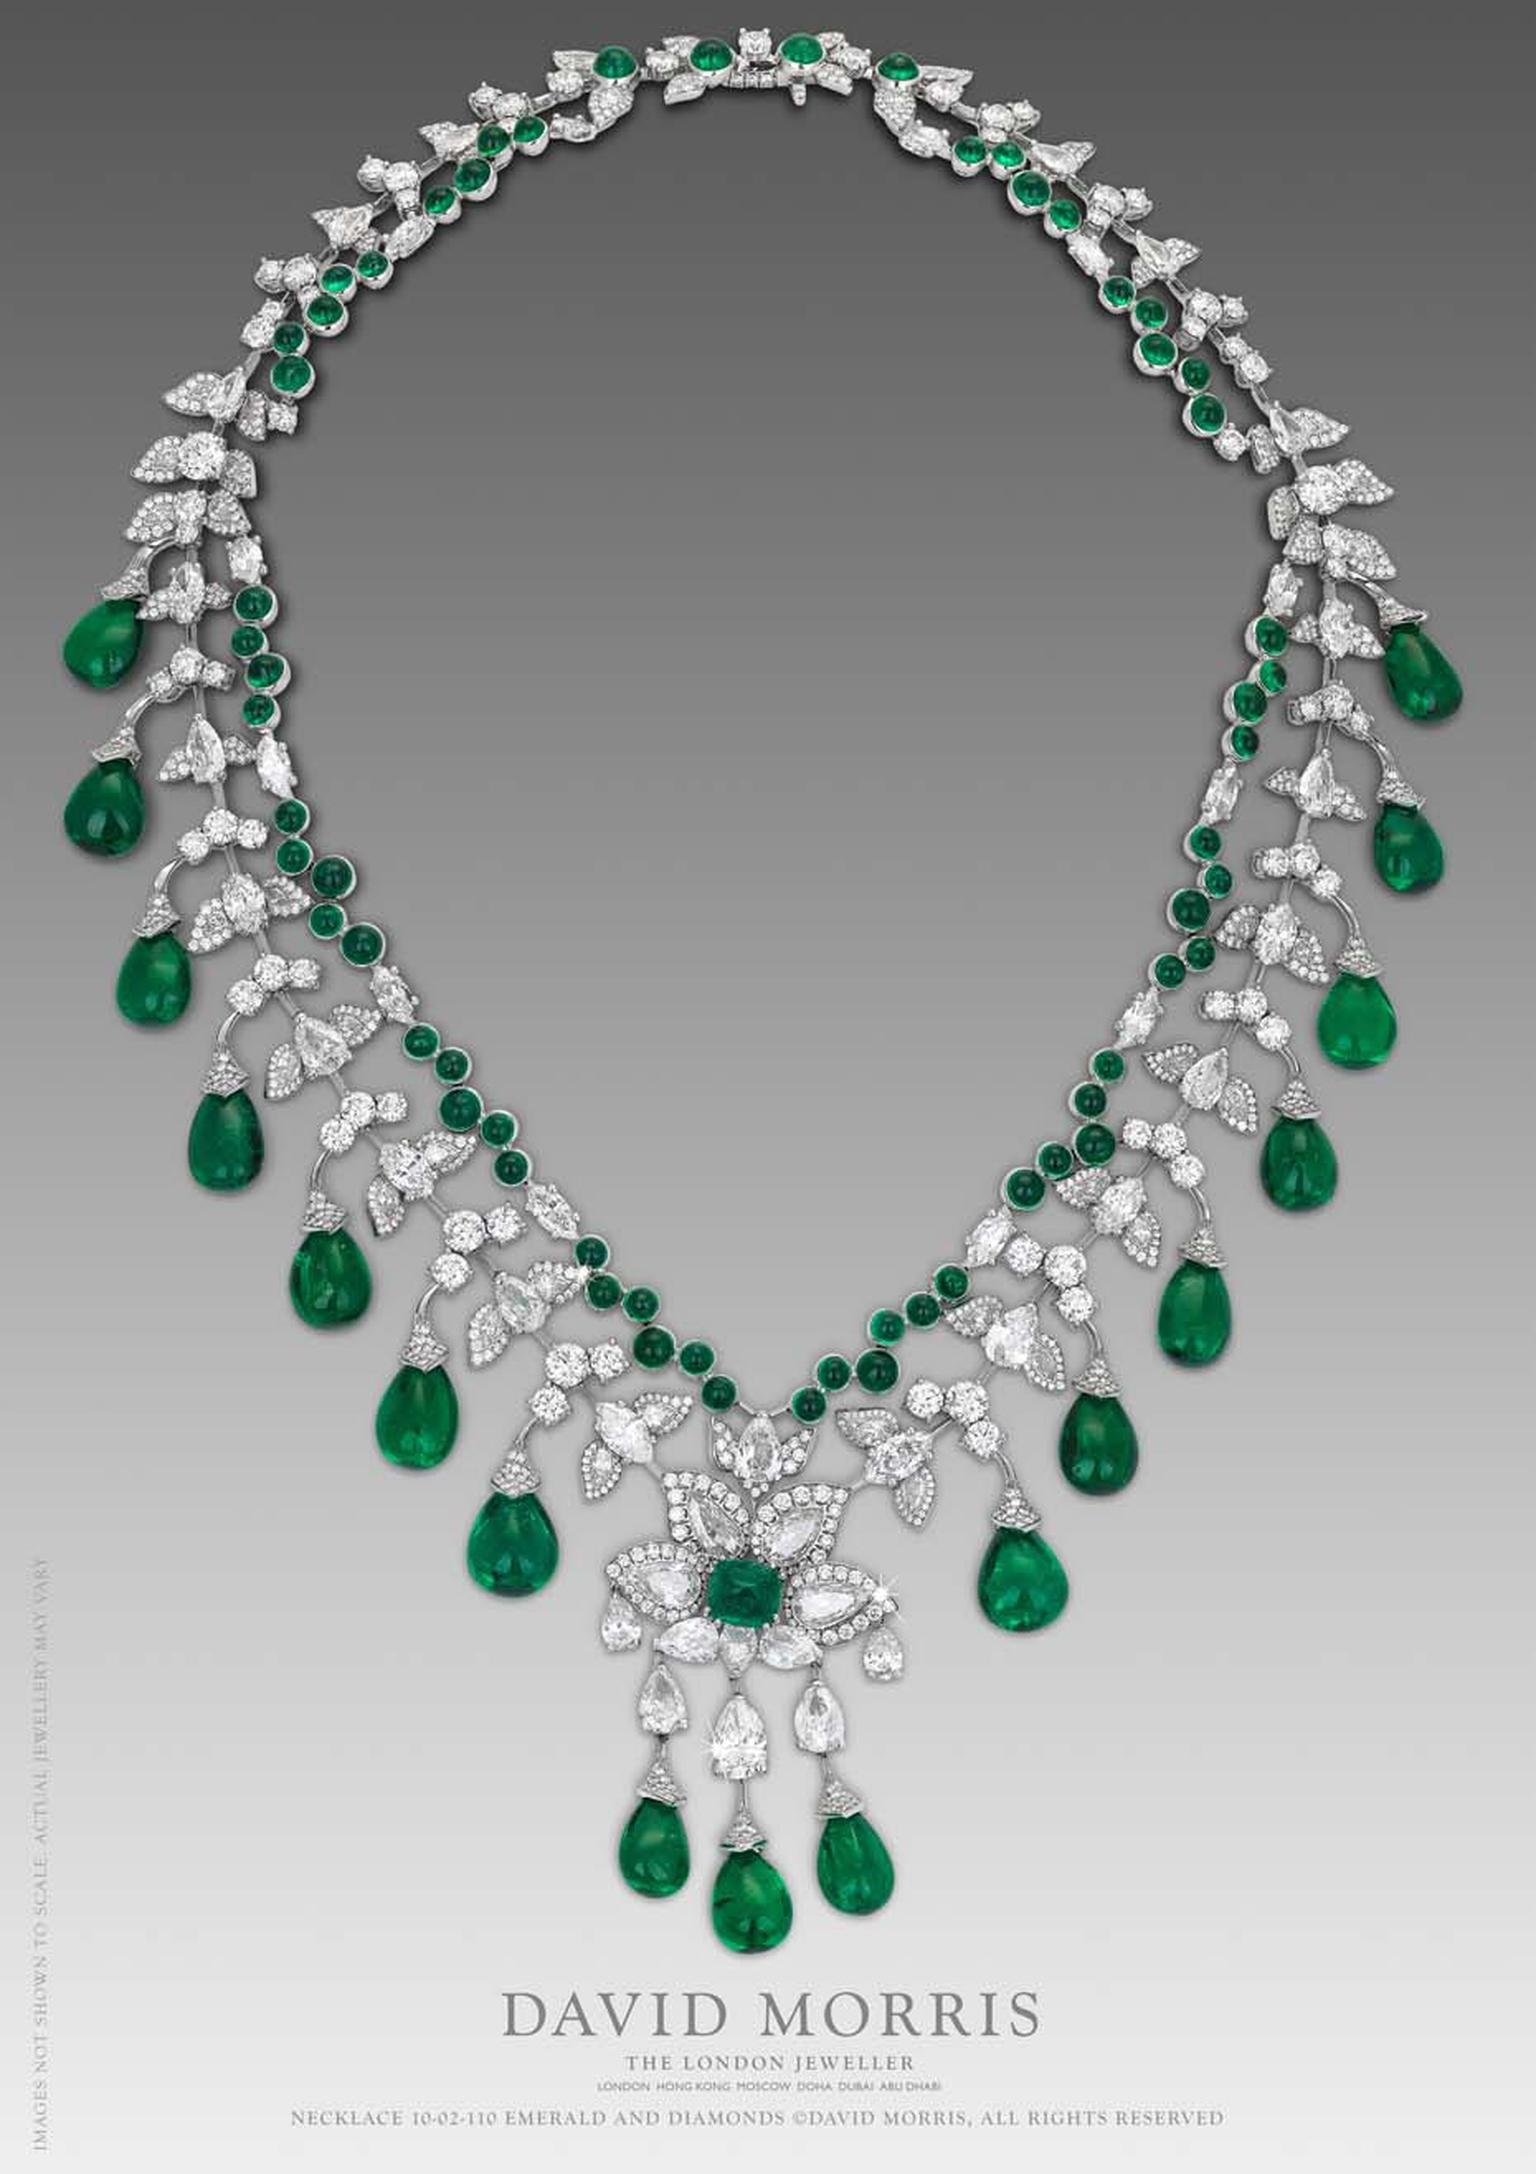 This Zambian emerald cabouchon necklace by David Morris, with round marquise diamonds and a pear shape motif set in 18ct white gold is truly breathtaking.